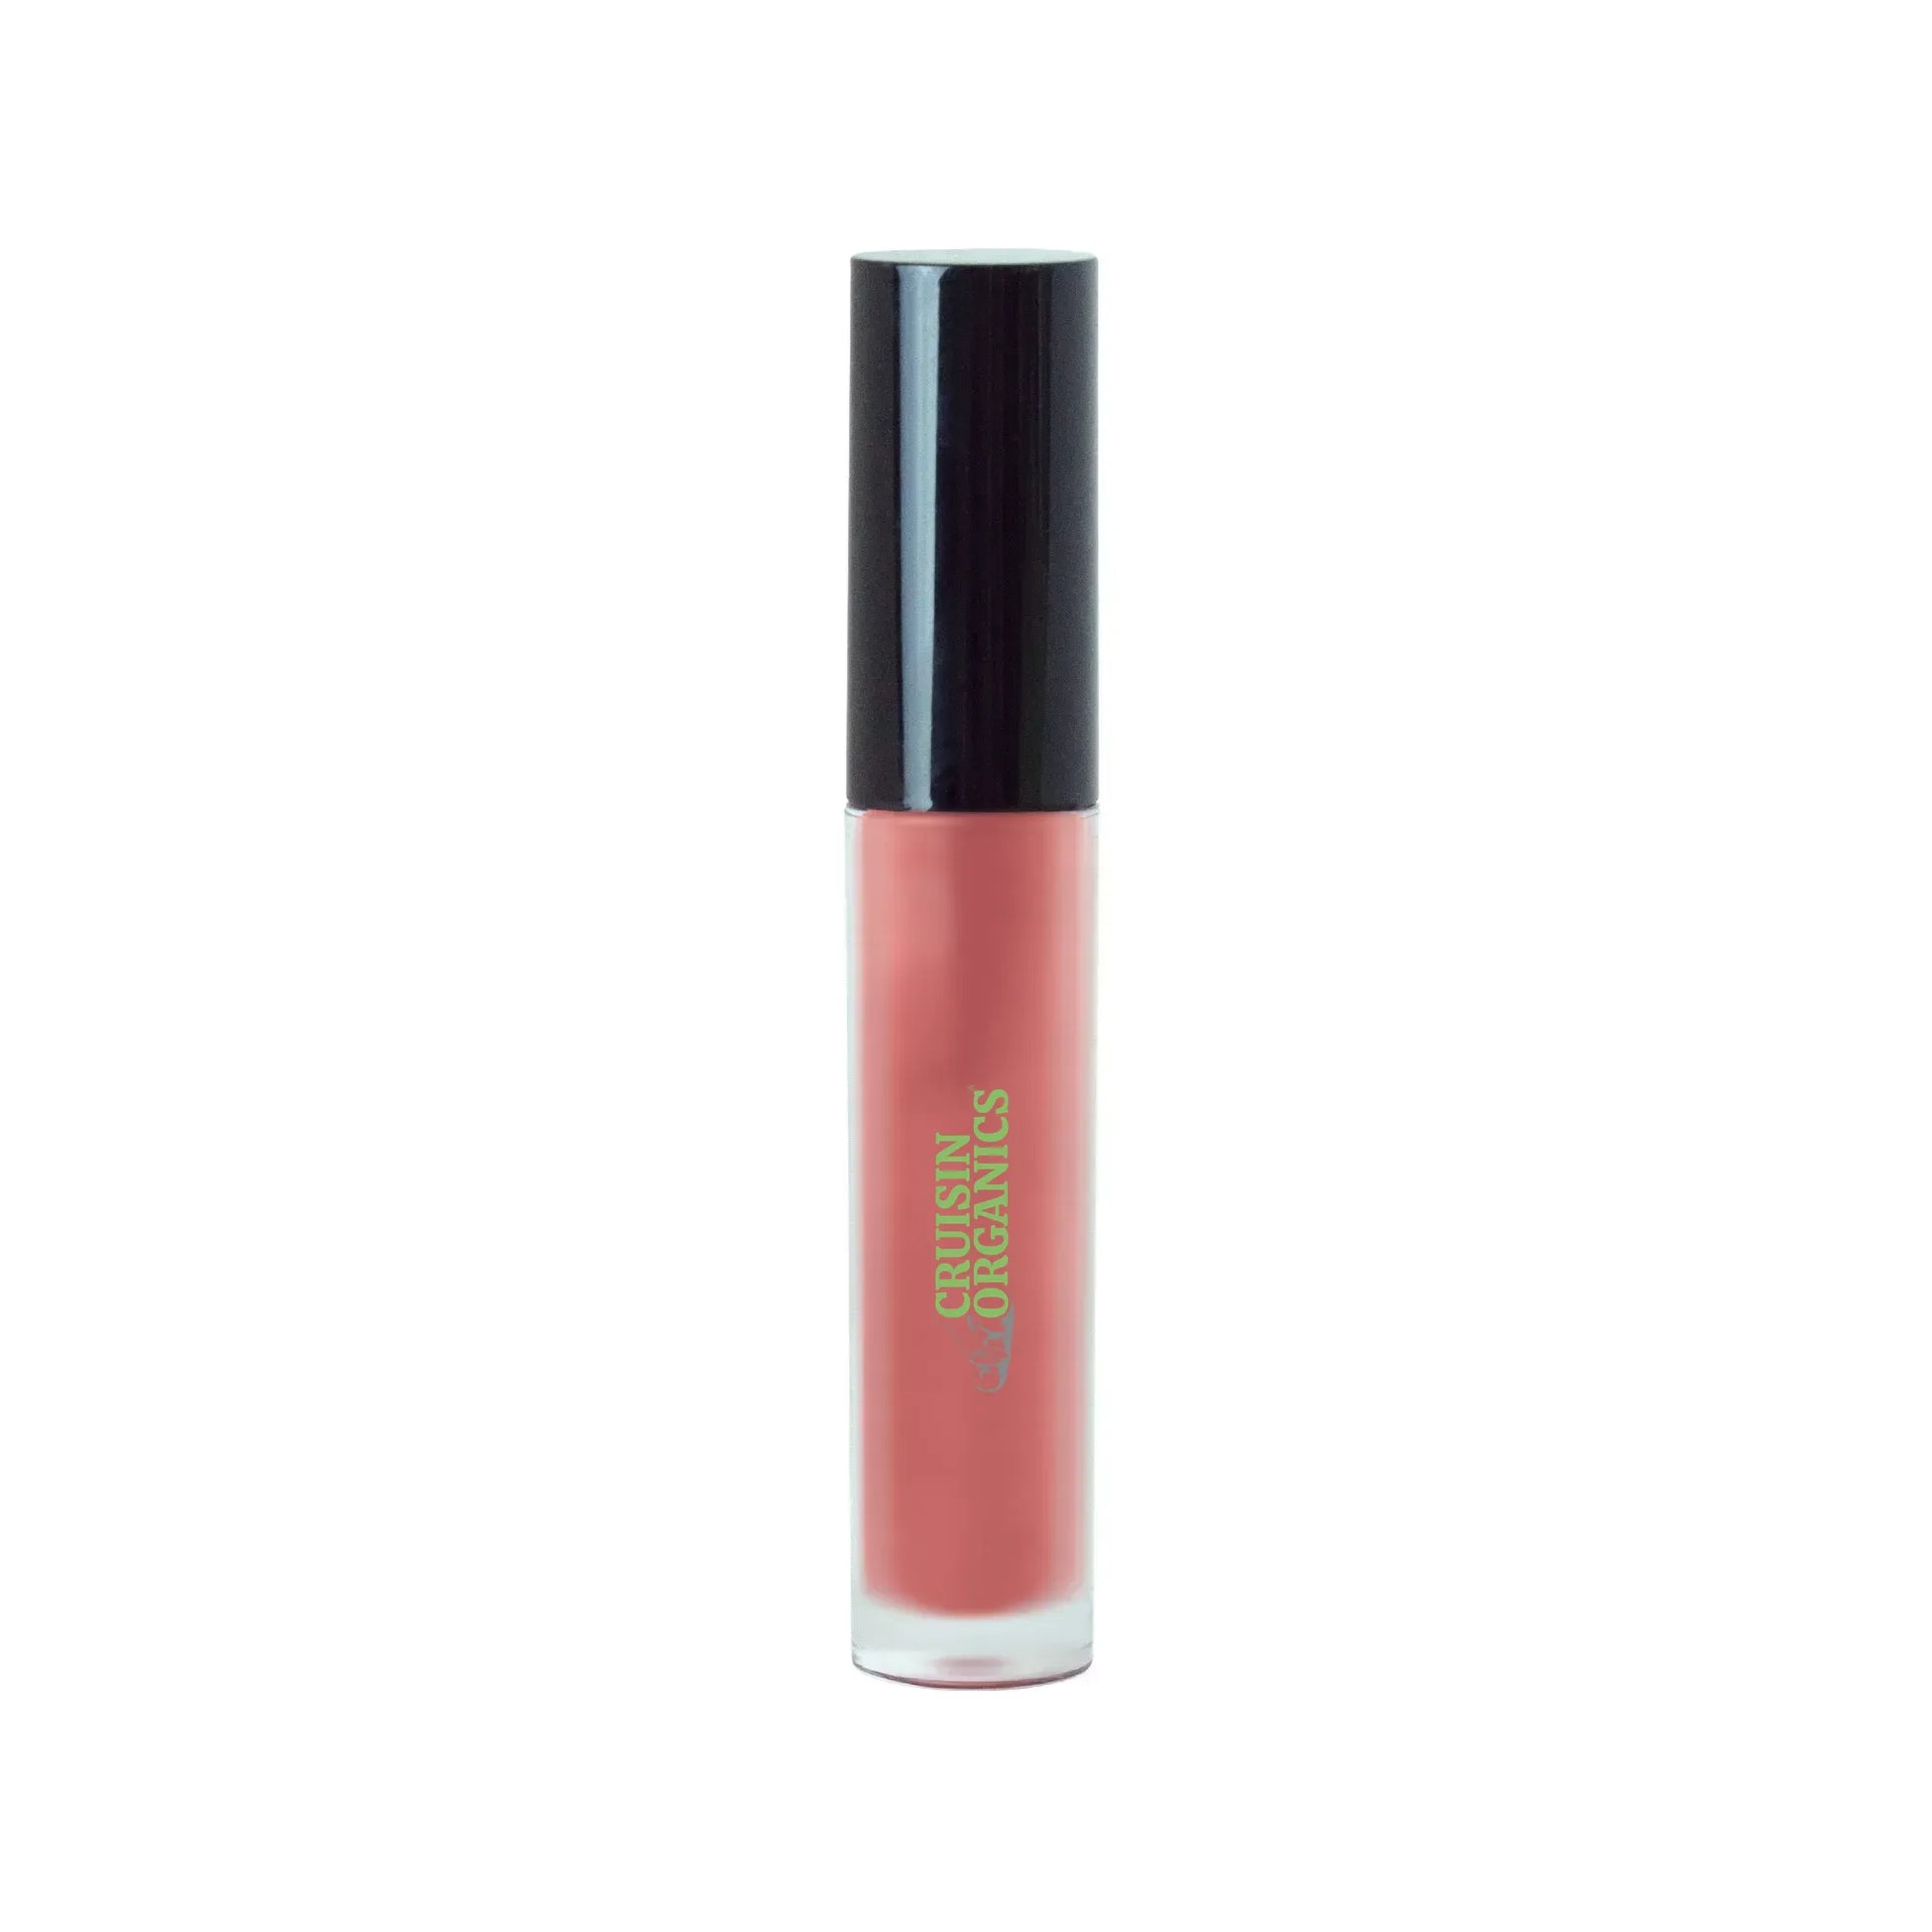 Experience the desired lasting brilliance with Cruisin Organics Chestnut Lip Gloss. This sheer-tinted lip gloss offers a precise and easy-to-use application. You can choose between shimmer or natural finishes, both of which are vegan and paraben-free, making for a clean and ethical beauty experience. Enjoy the benefits of this excellent product.